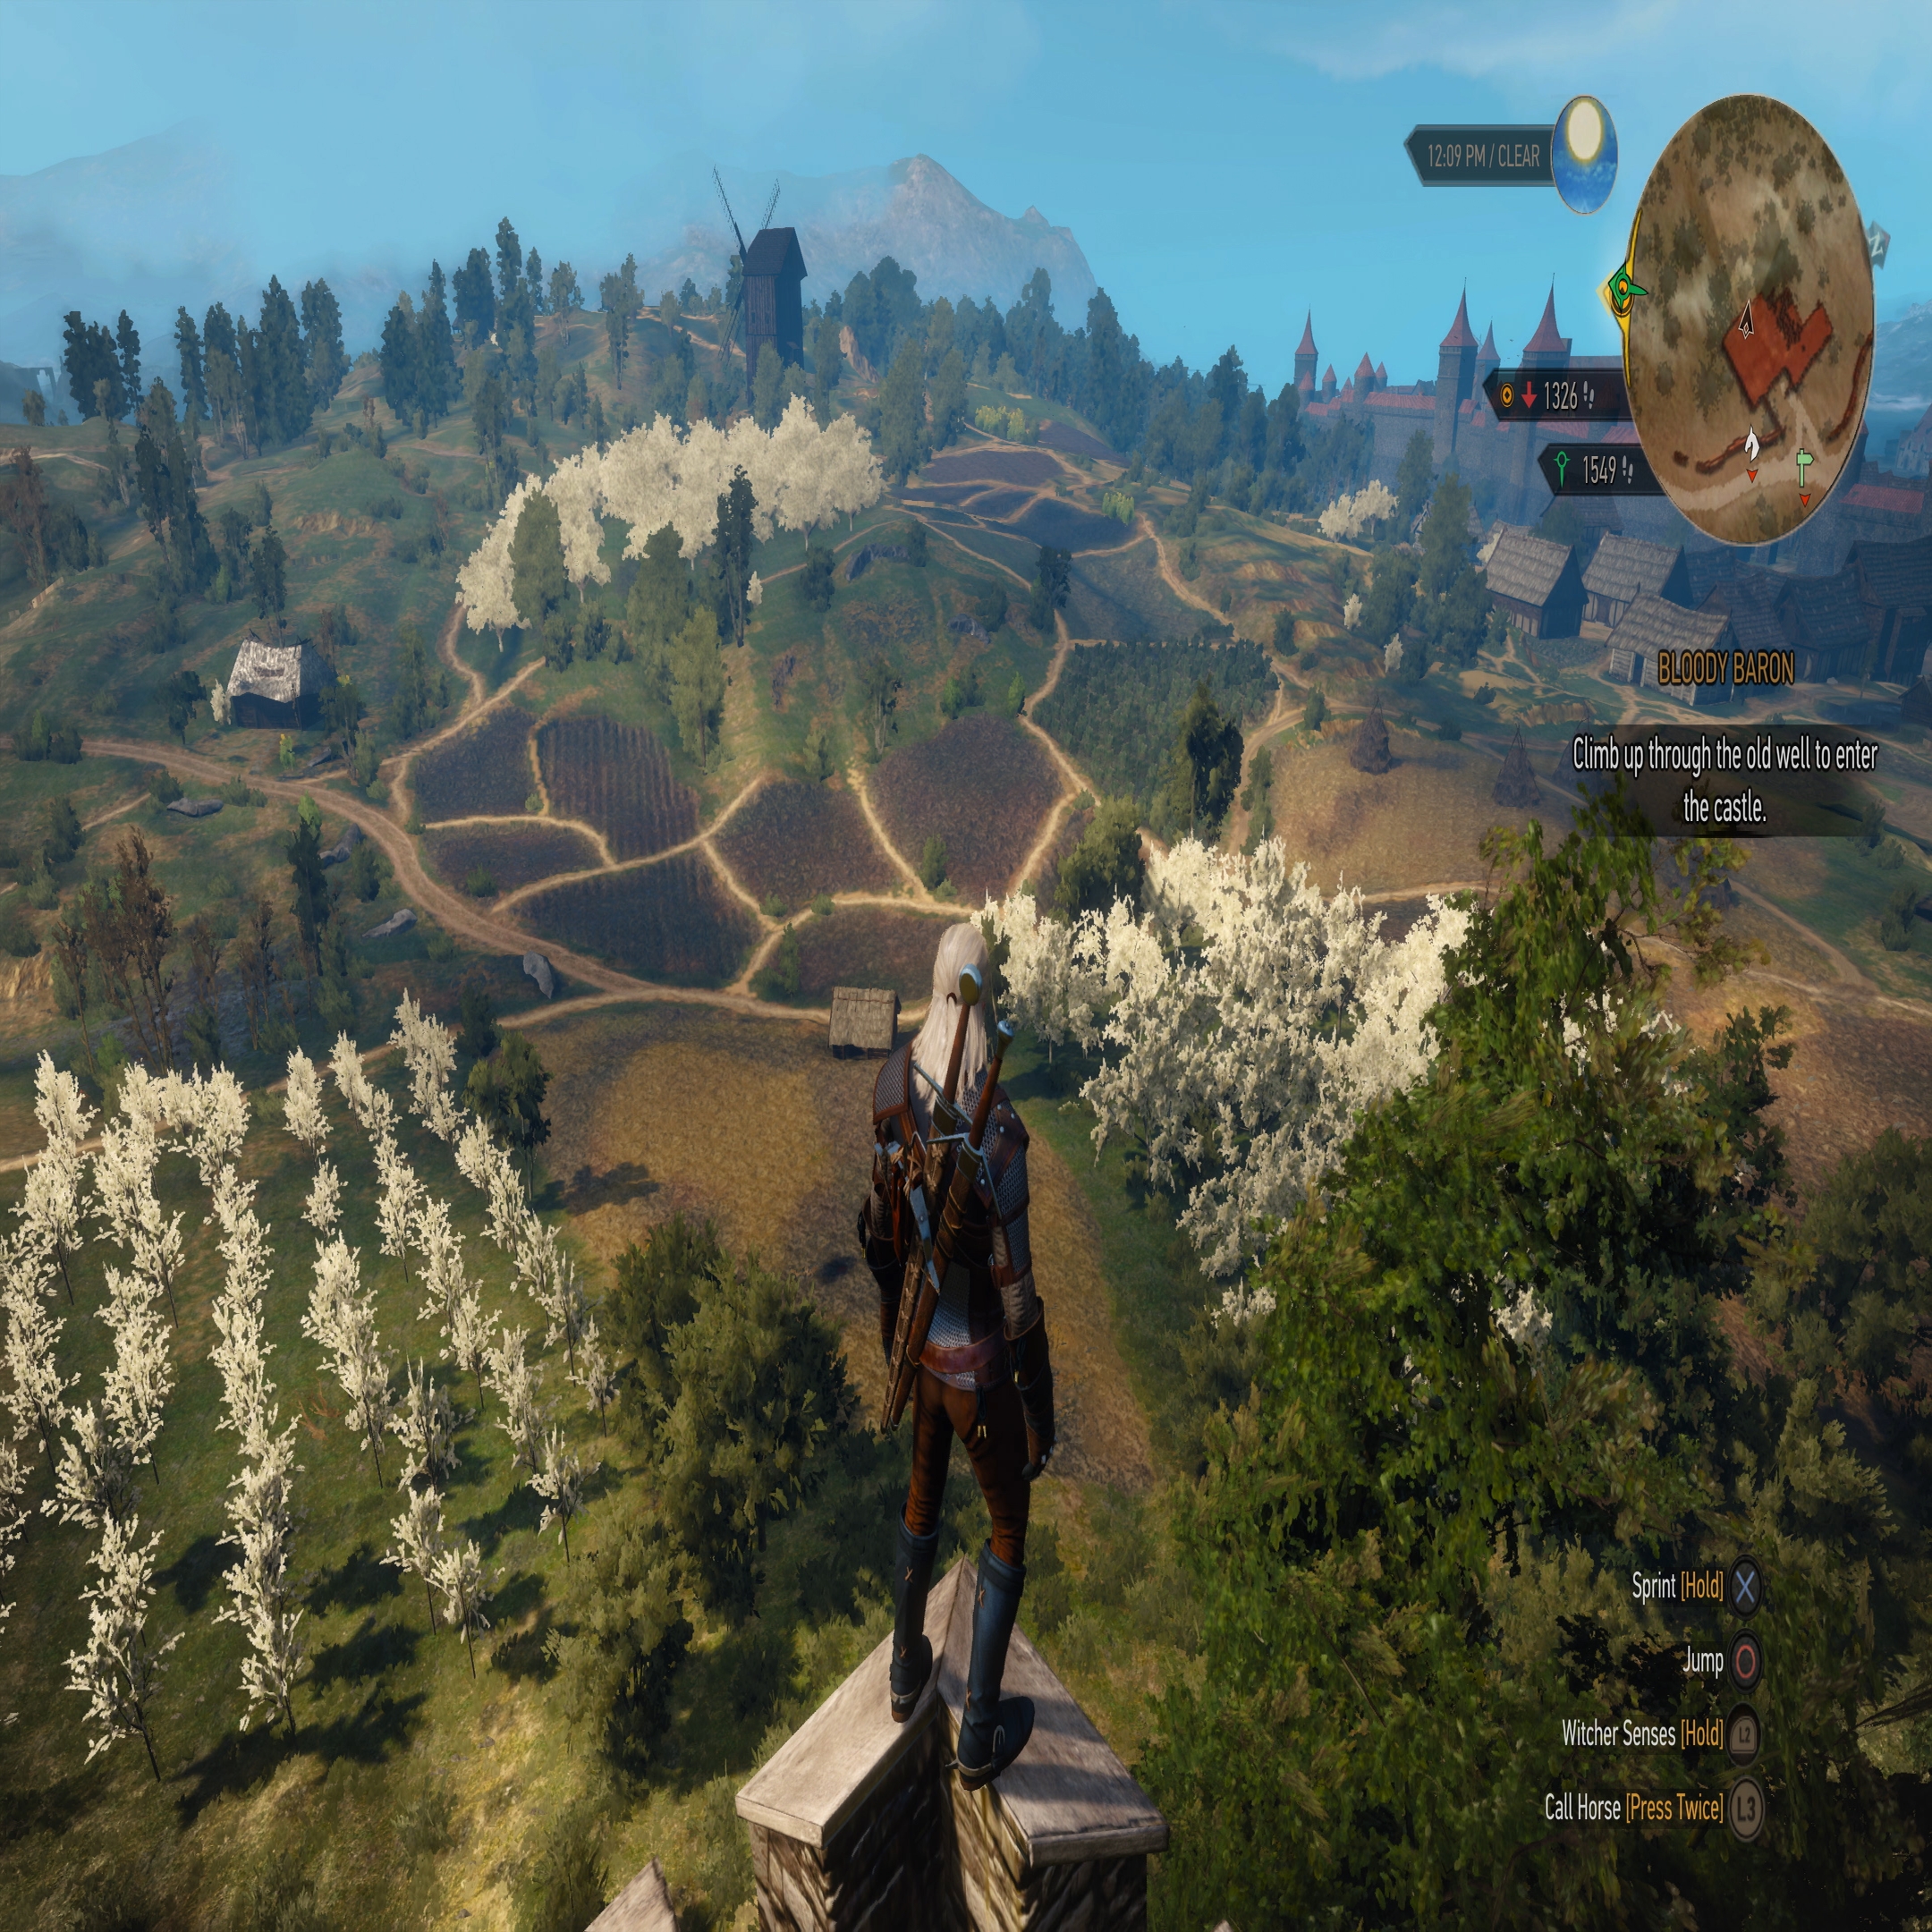 Does The Witcher 3 on PS4 Pro deliver a top-tier 4K experience?